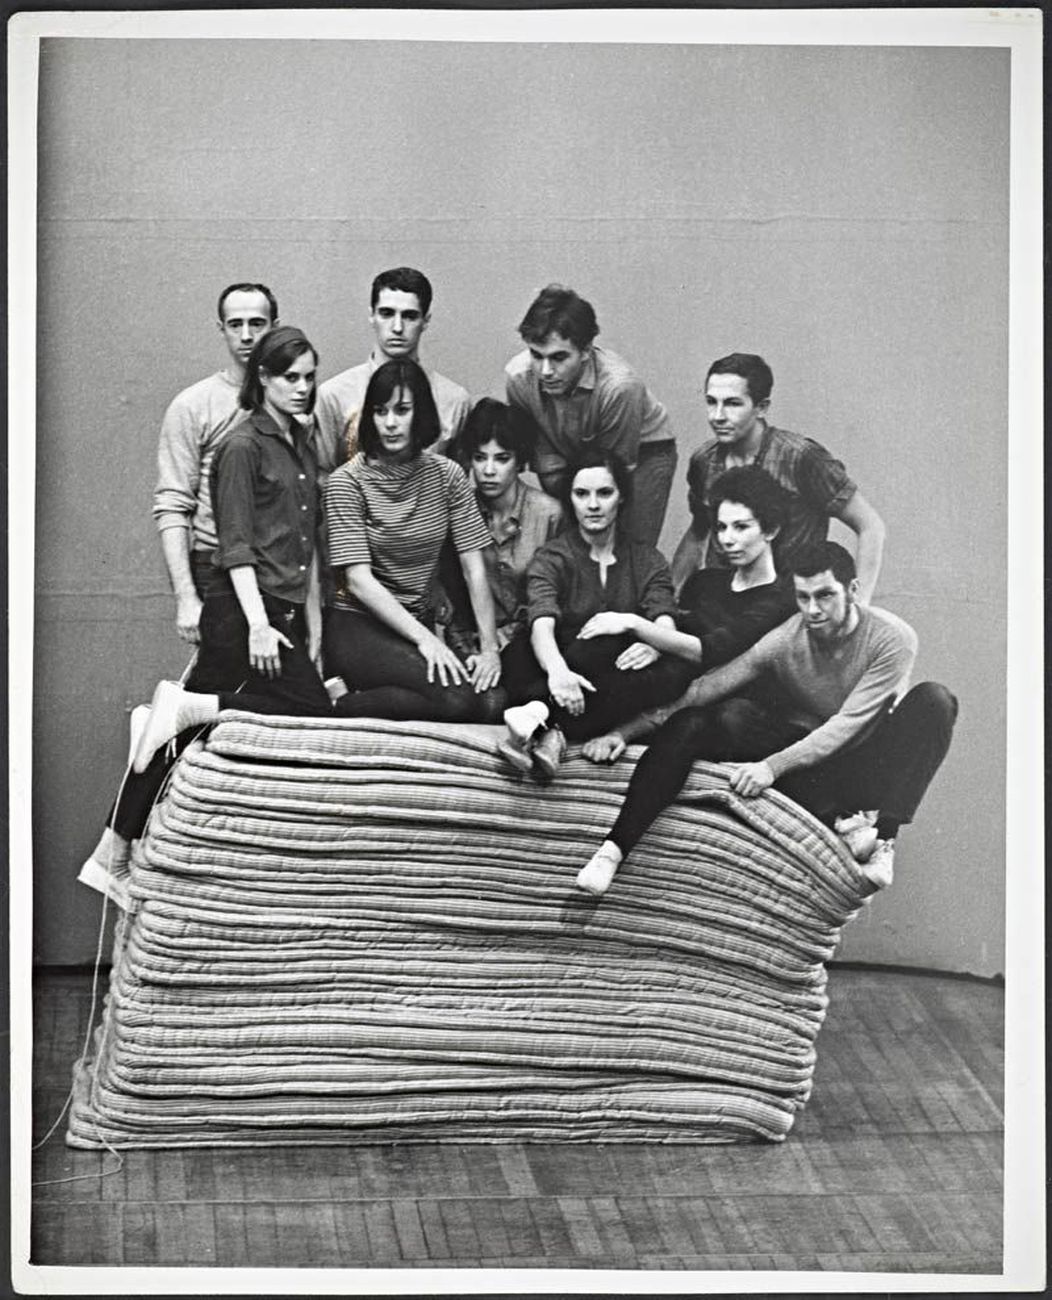 Peter Moore, Untitled (The cast of Yvonne Rainer’s Part of Some Sextets, 1965). Courtesy of Barbara Moore e Paula Cooper Gallery